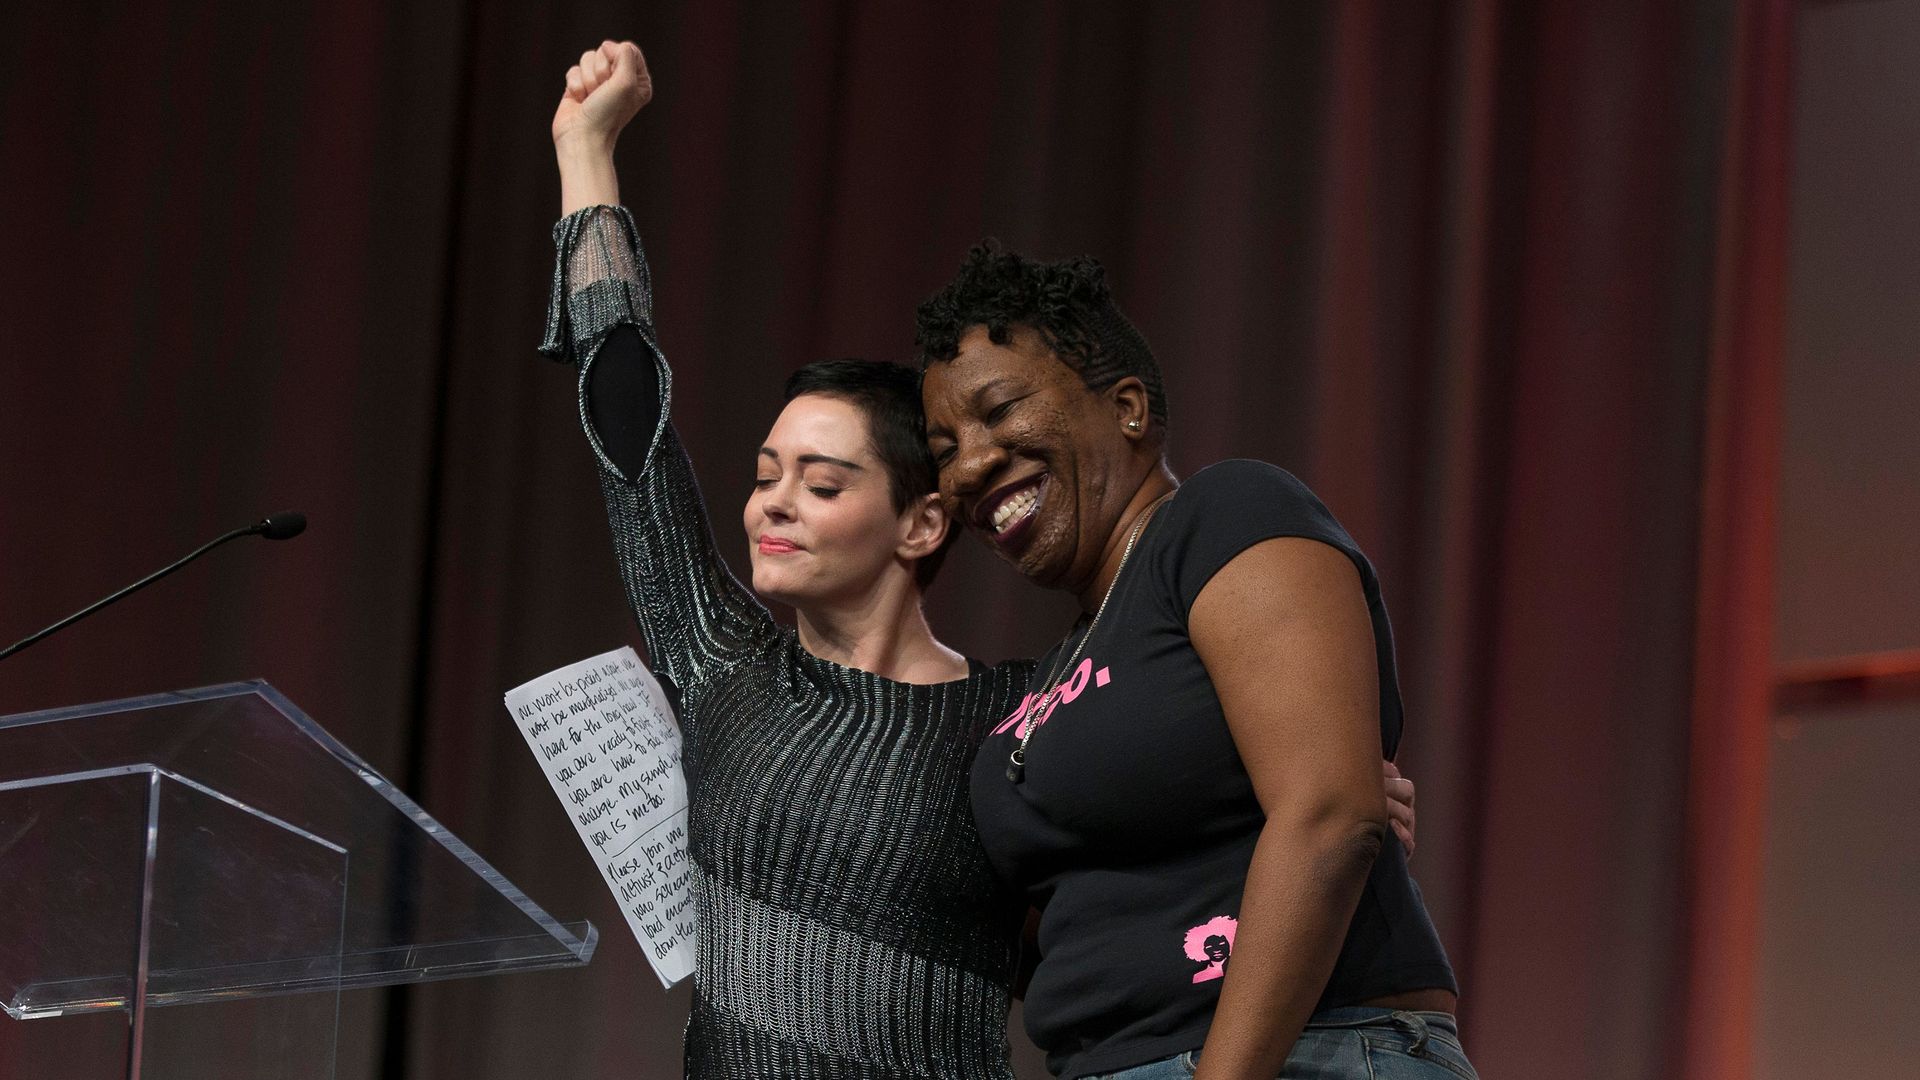 Actor Rose McGowan and Founder of #MeToo Campaign Tarana Burke, embrace on stage at the Women's March / Women's Convention in Detroit, Michigan, on October 27